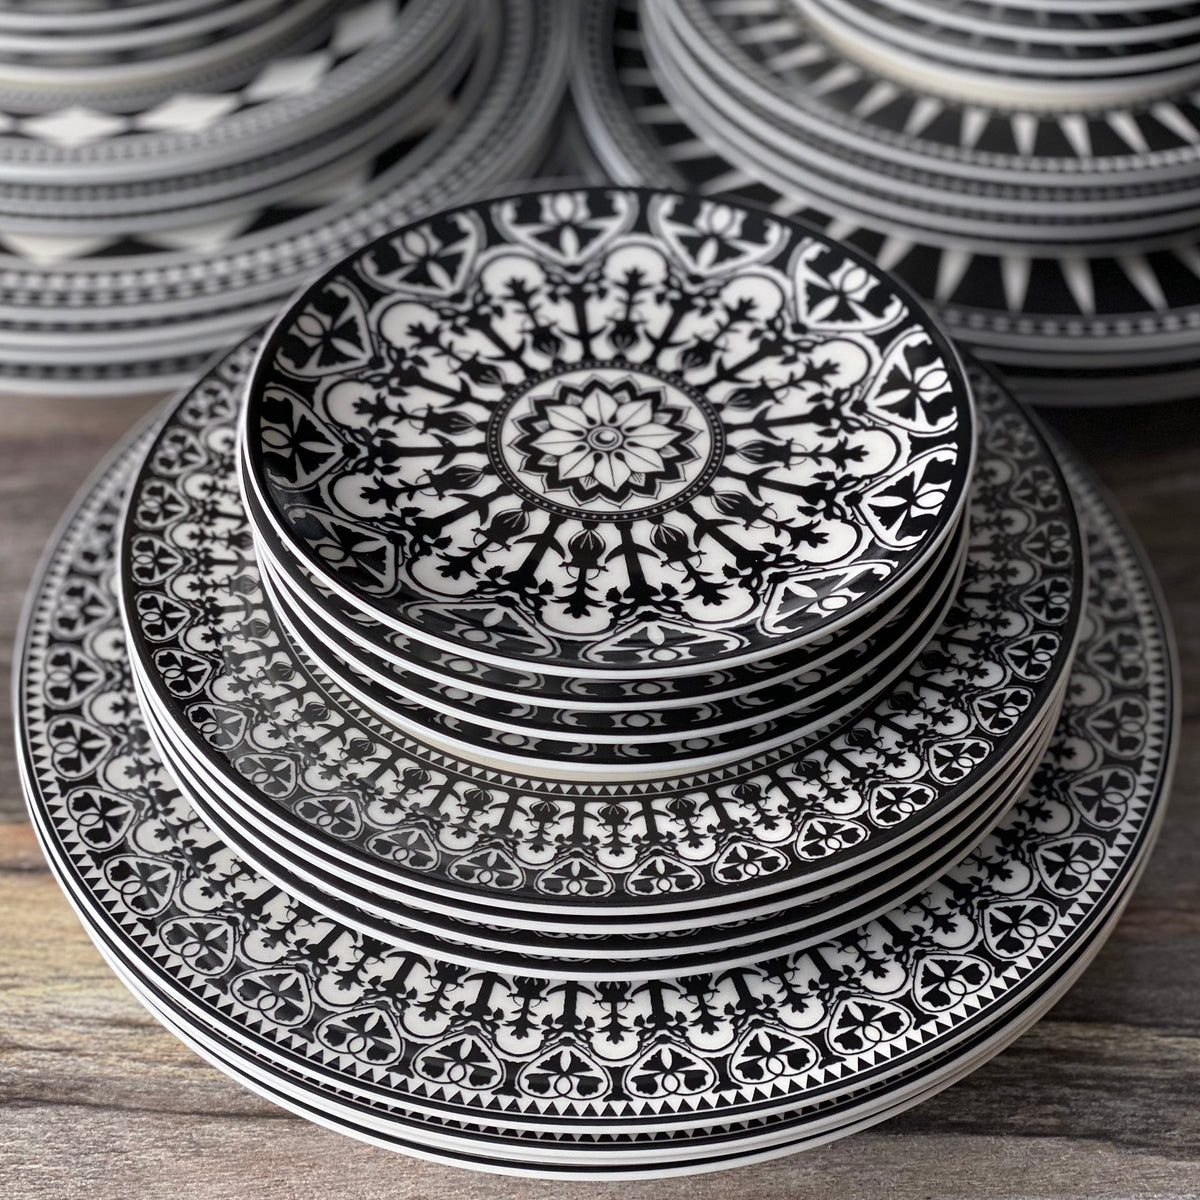 Casablanca Black Rimmed dinner plates by Caskata Artisanal Home stacked on top of each other.